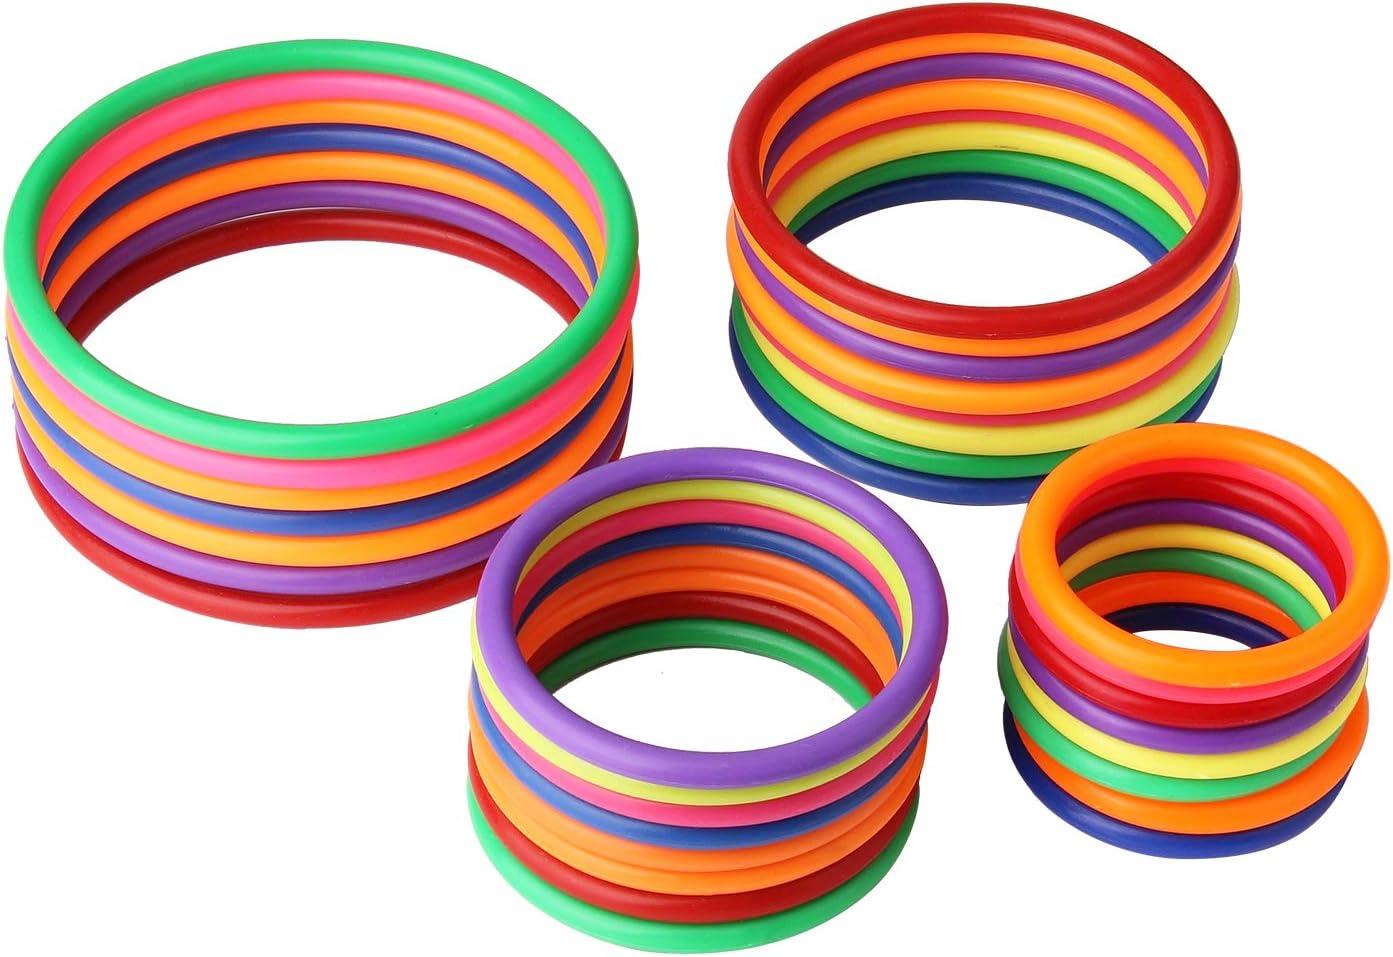 Hysagtek 21 Pcs Plastic Toss Rings Carnival Rings Toss Game for Kids Fun  Target Toys, Party Favor Games, Speed and Agility Practice Games,  Multicolor